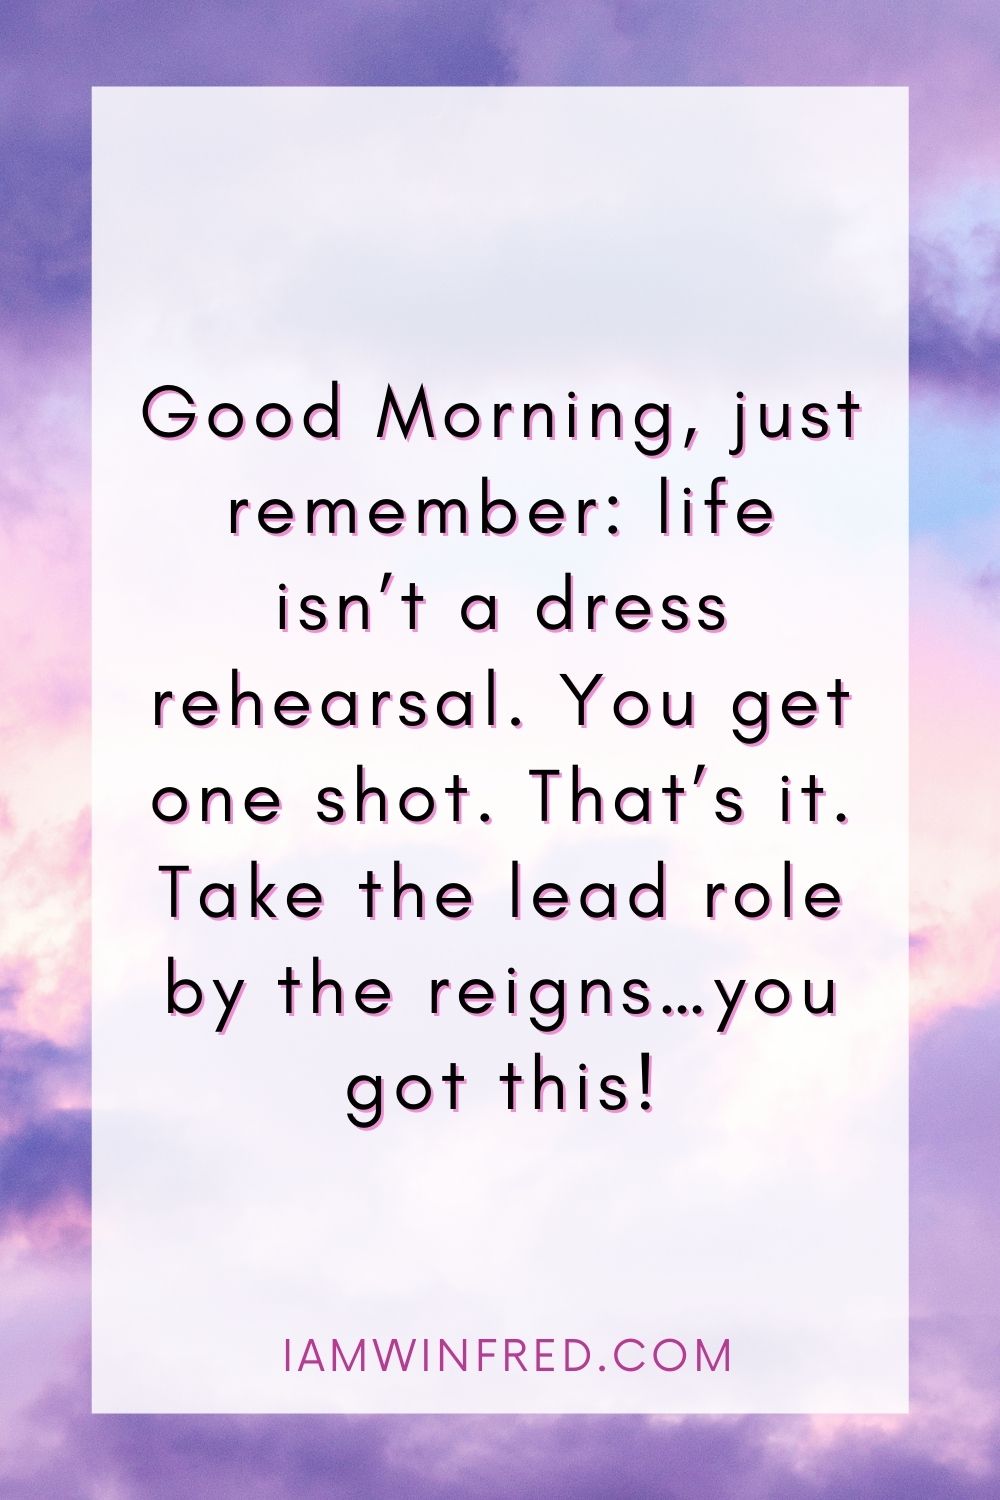 Good Morning Just Remember Life Isnt A Dress Rehearsal. You Get One Shot. Thats It. Take The Lead Role By The Reigns…You Got This 1